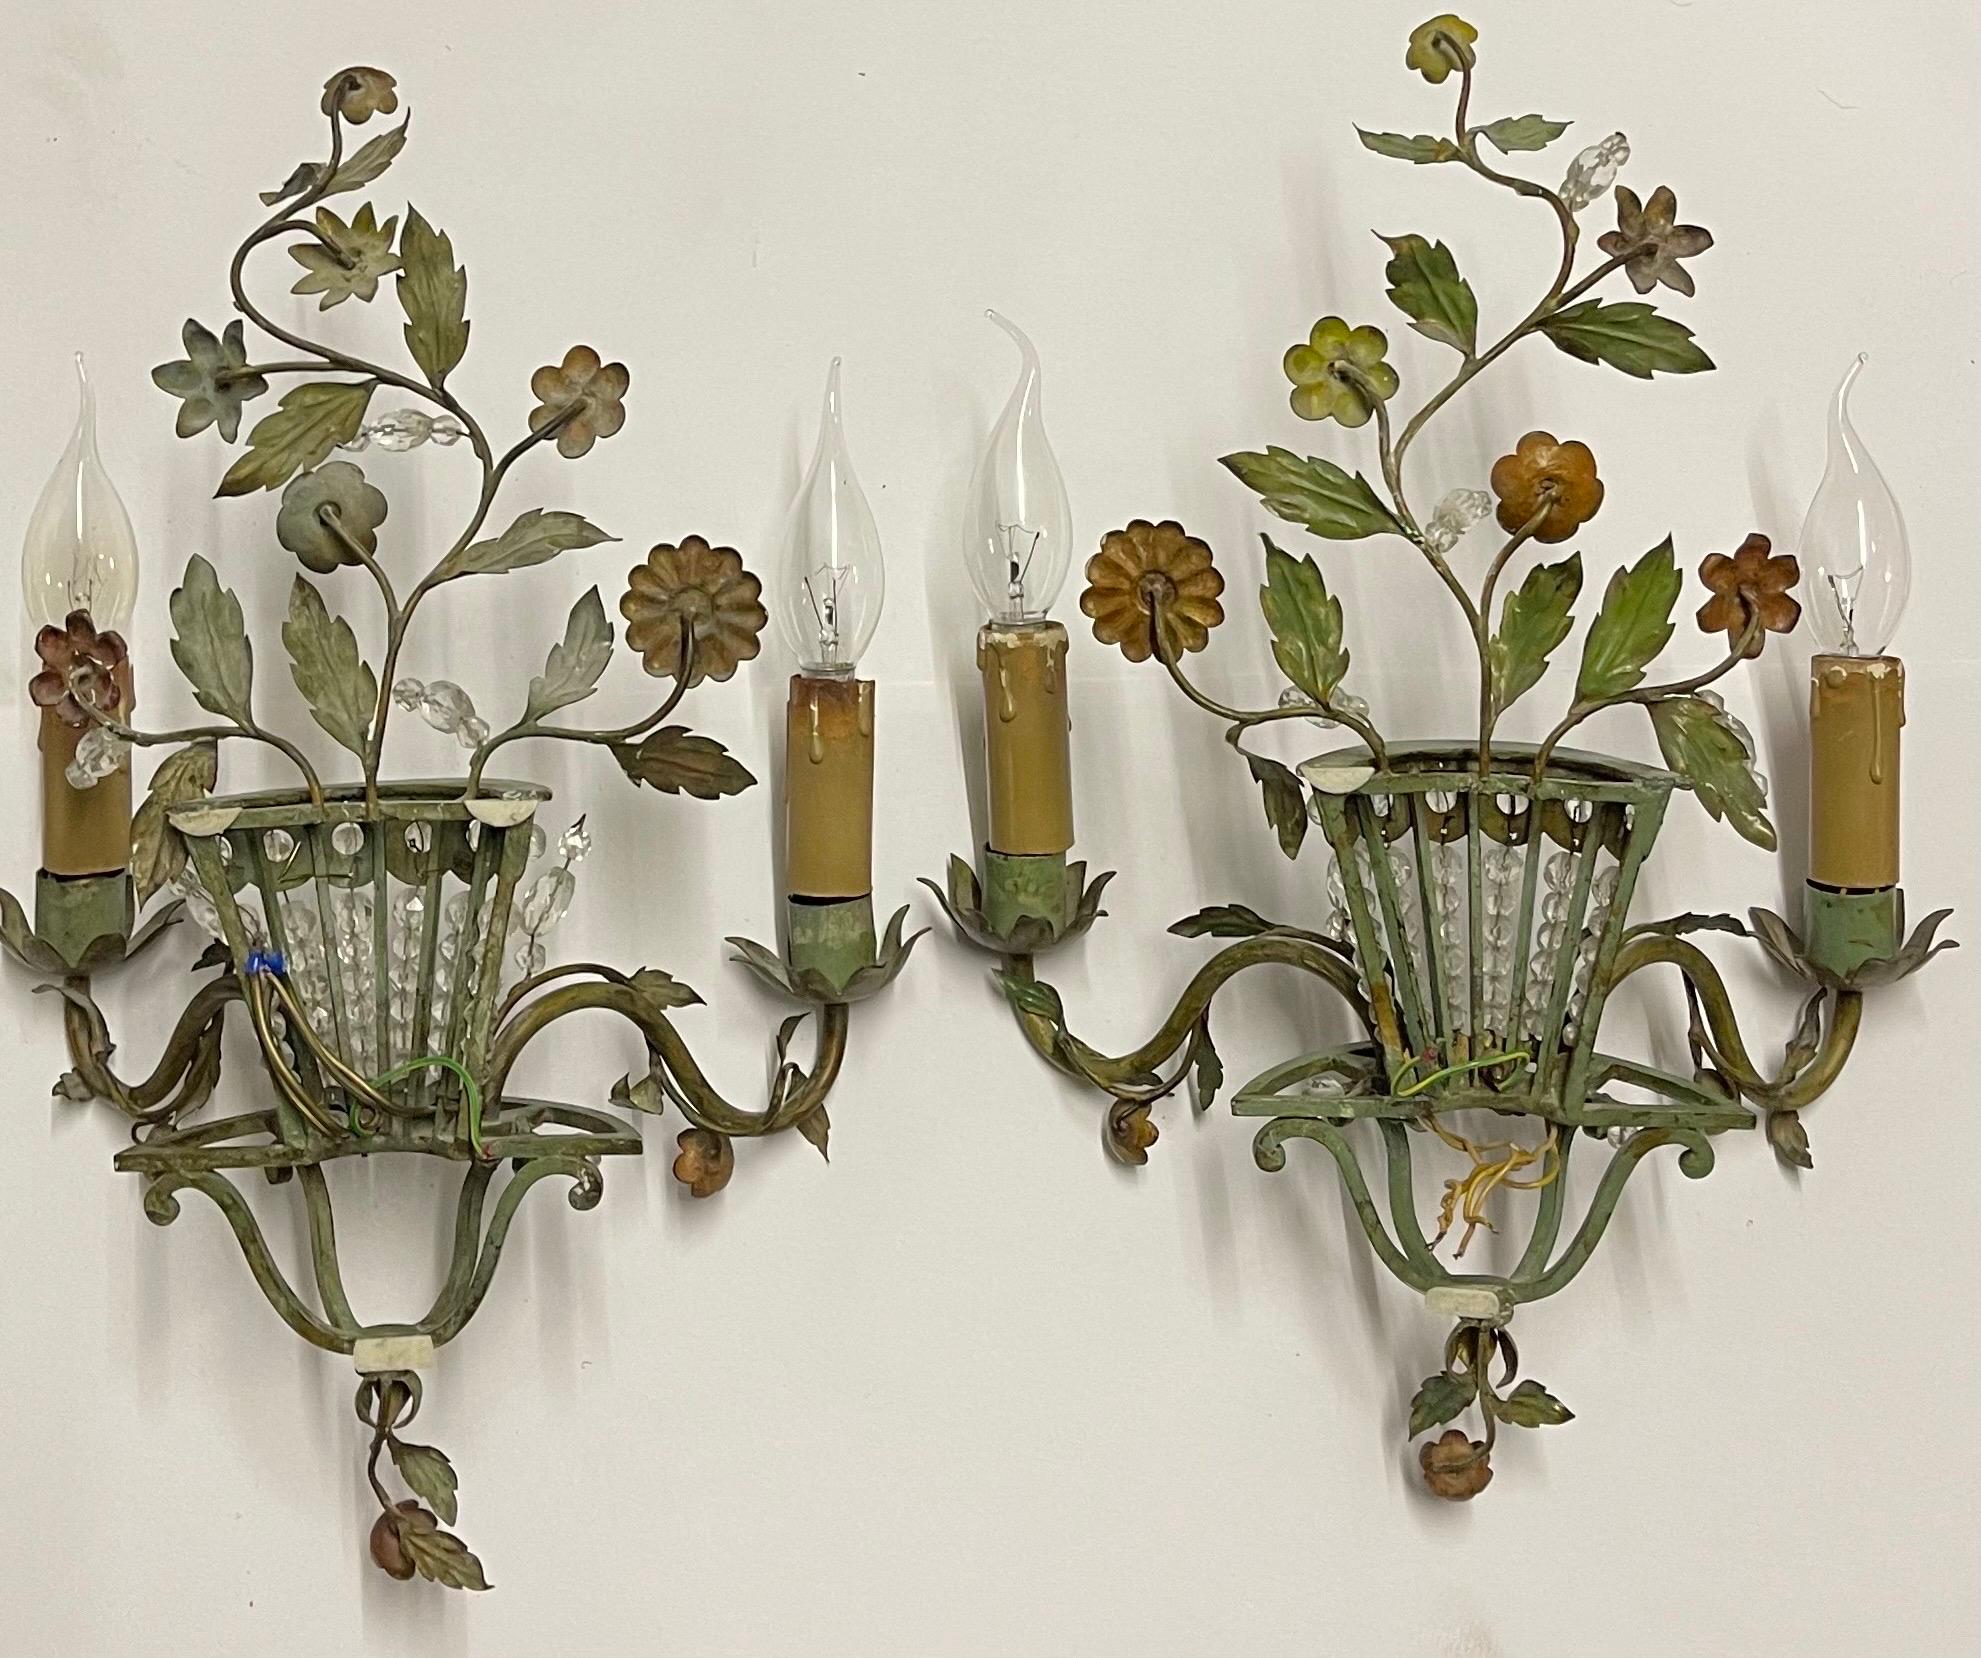 Pair of French Patinated Bronze Flower and Leaves Wall Sconces, circa 1920s For Sale 4